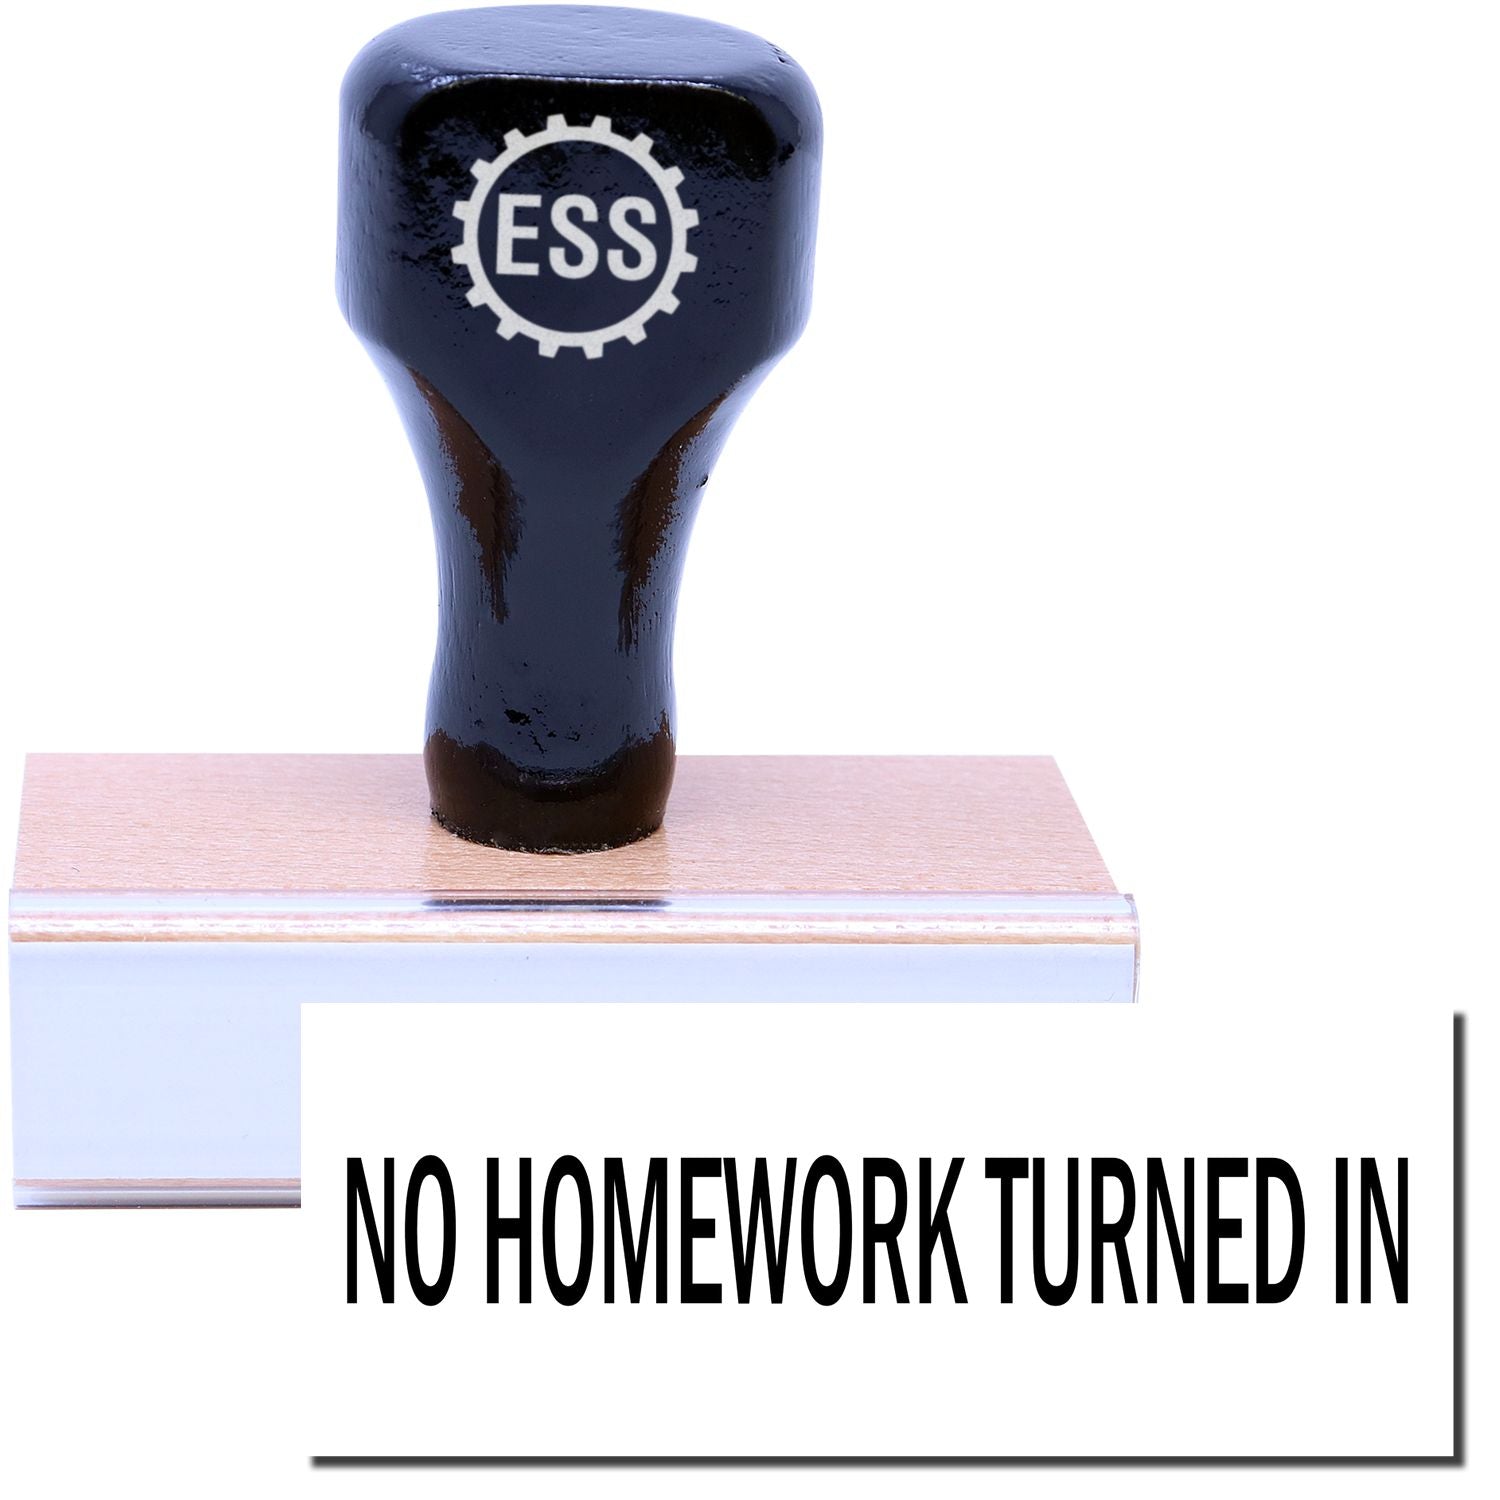 A stock office rubber stamp with a stamped image showing how the text "NO HOMEWORK TURNED IN" in a large font is displayed after stamping.